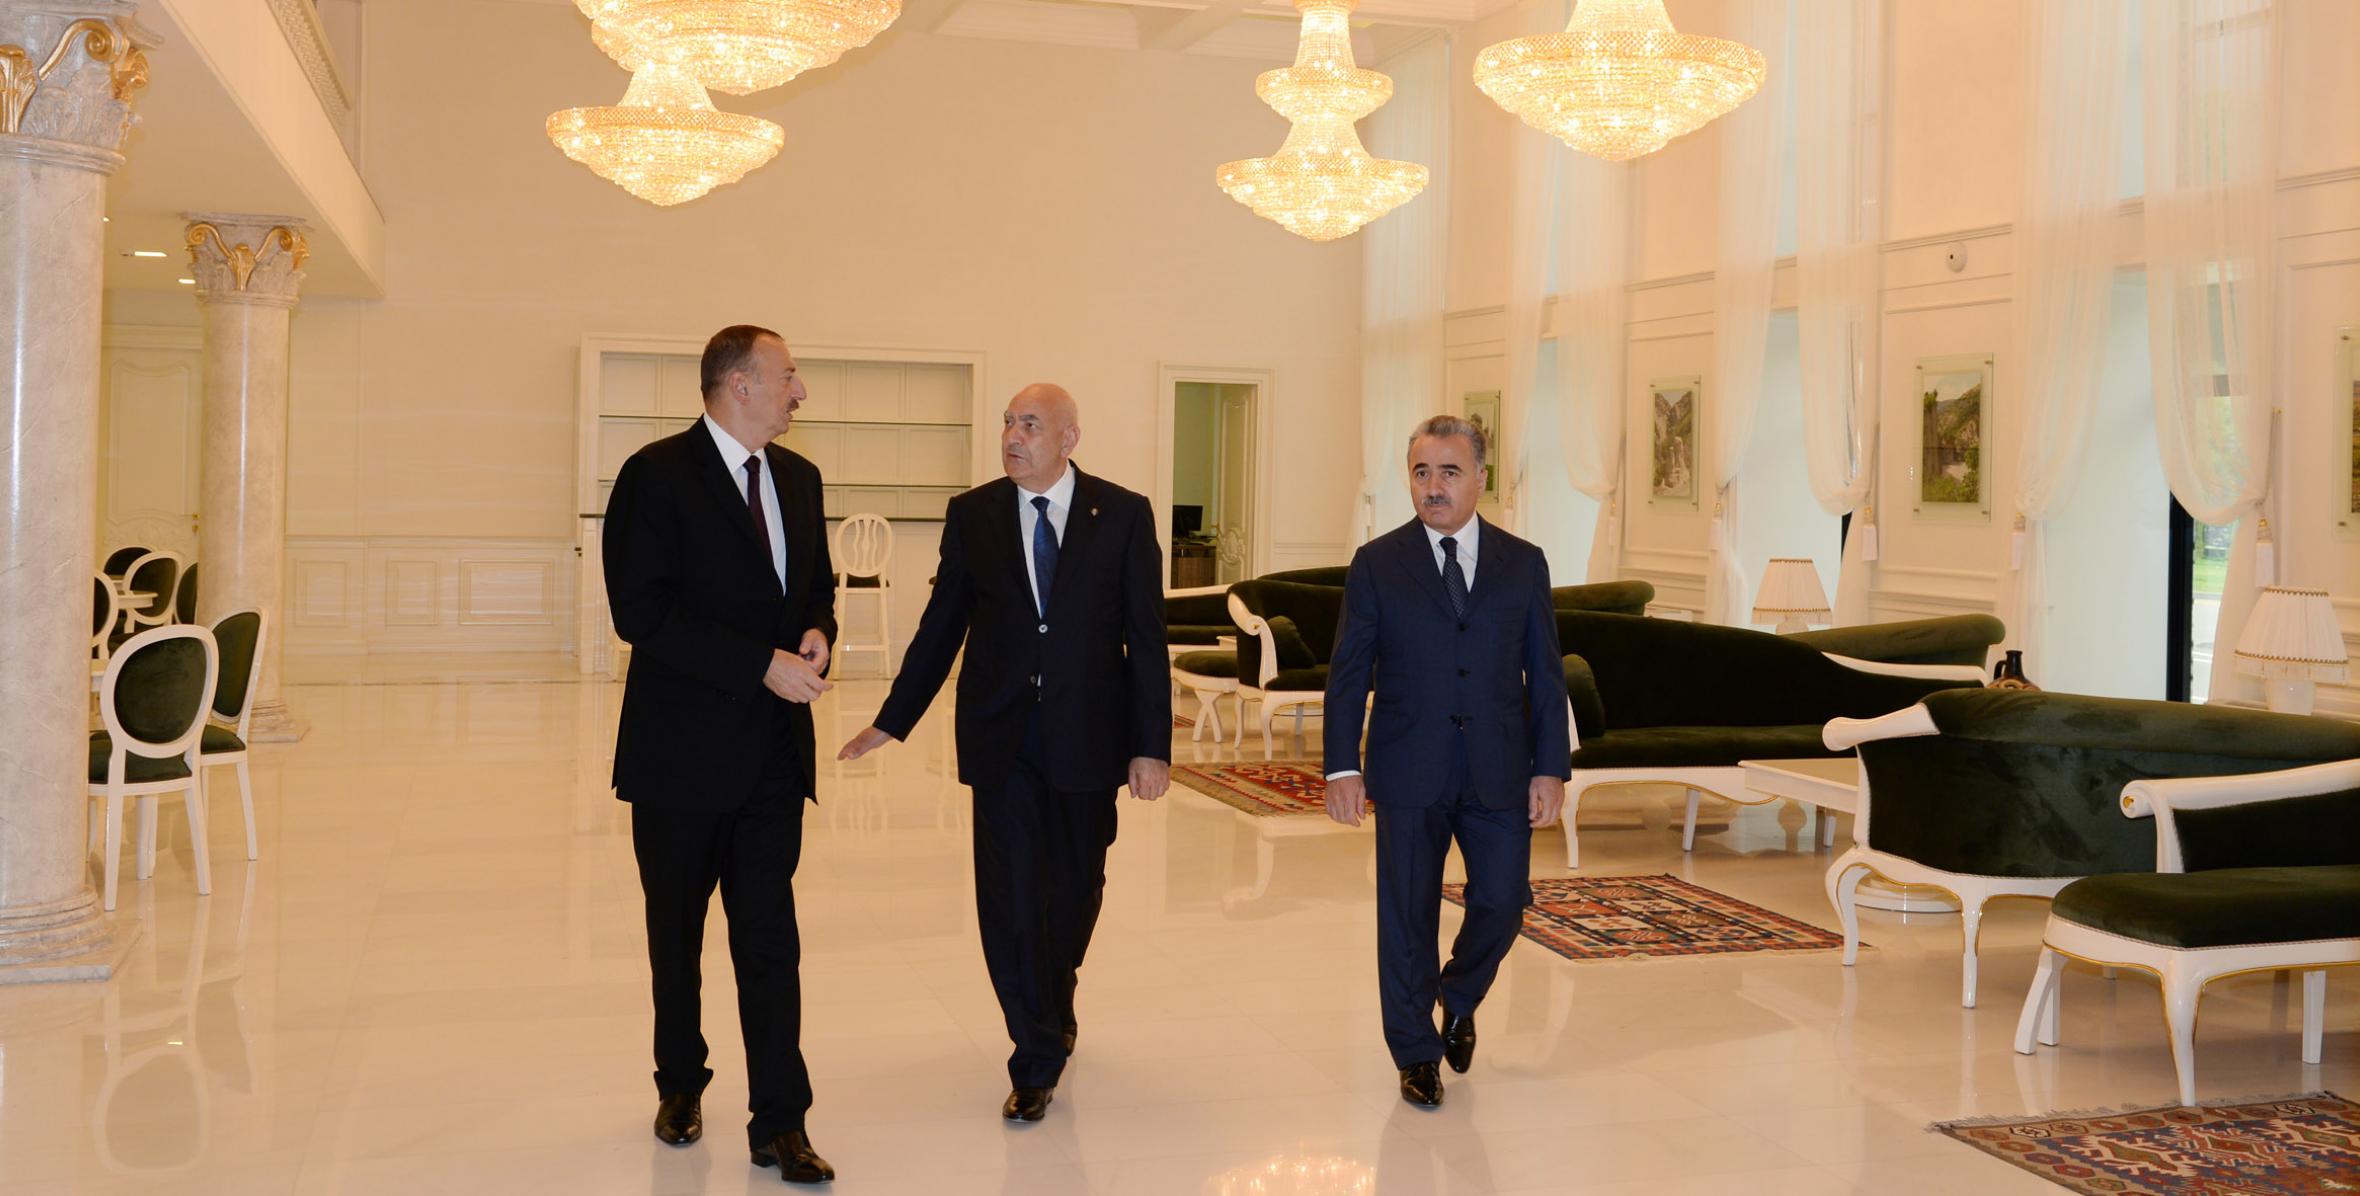 Ilham Aliyev reviewed Ismayilli District Culture Palace after major overhaul